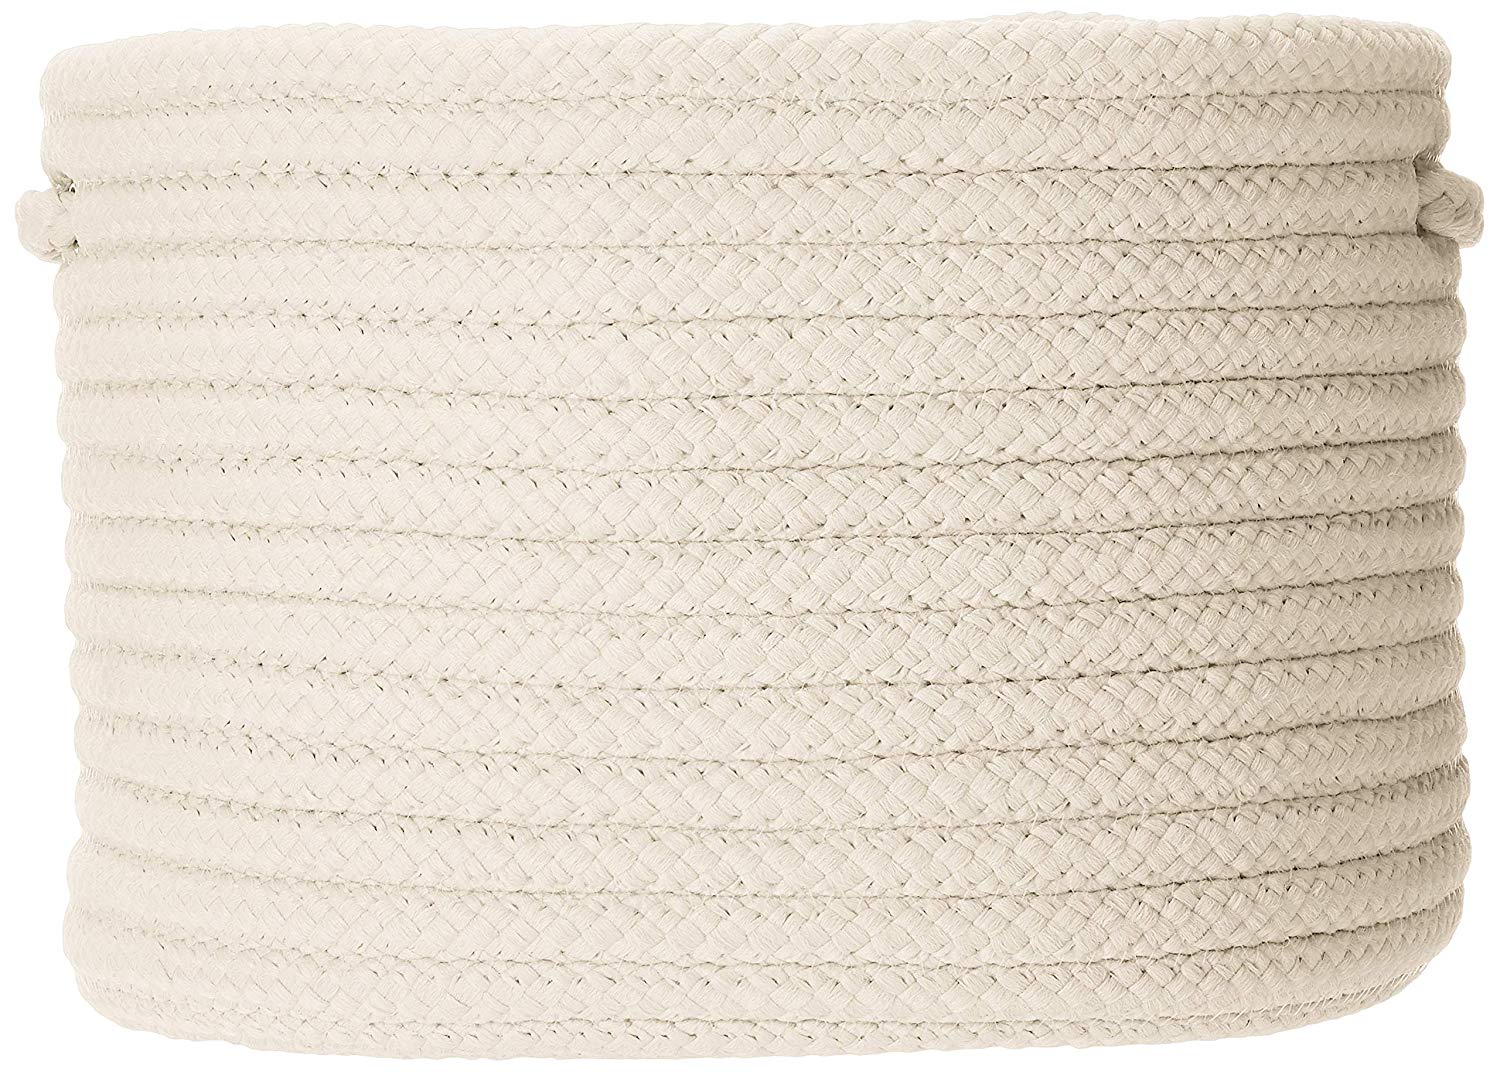 Colonial Mills 24" White Handcrafted Round Braided Basket - image 2 of 6